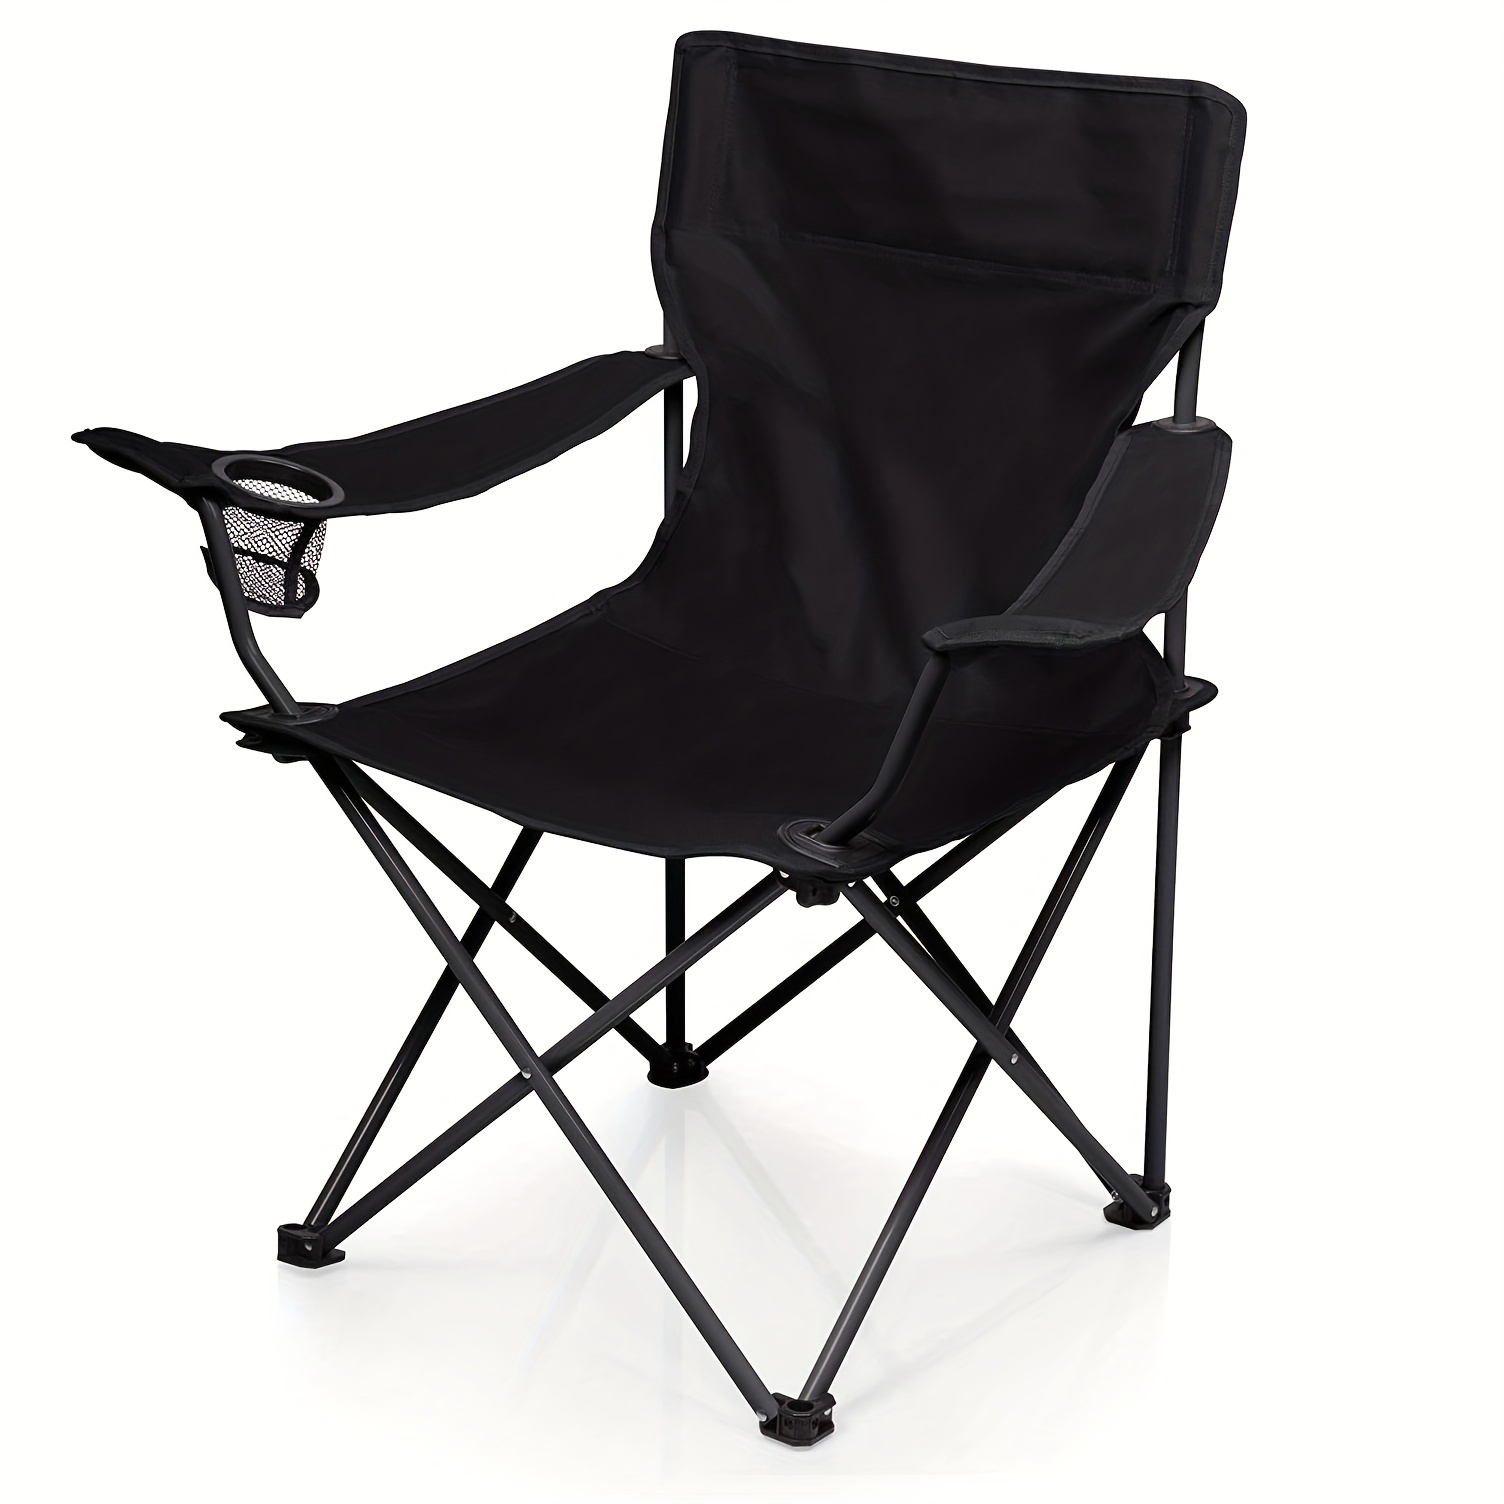 Heavy-Duty Portable Camping Chair: Lightweight, Pocket & Bottle Holder,  Perfect For Hiking & Beach!